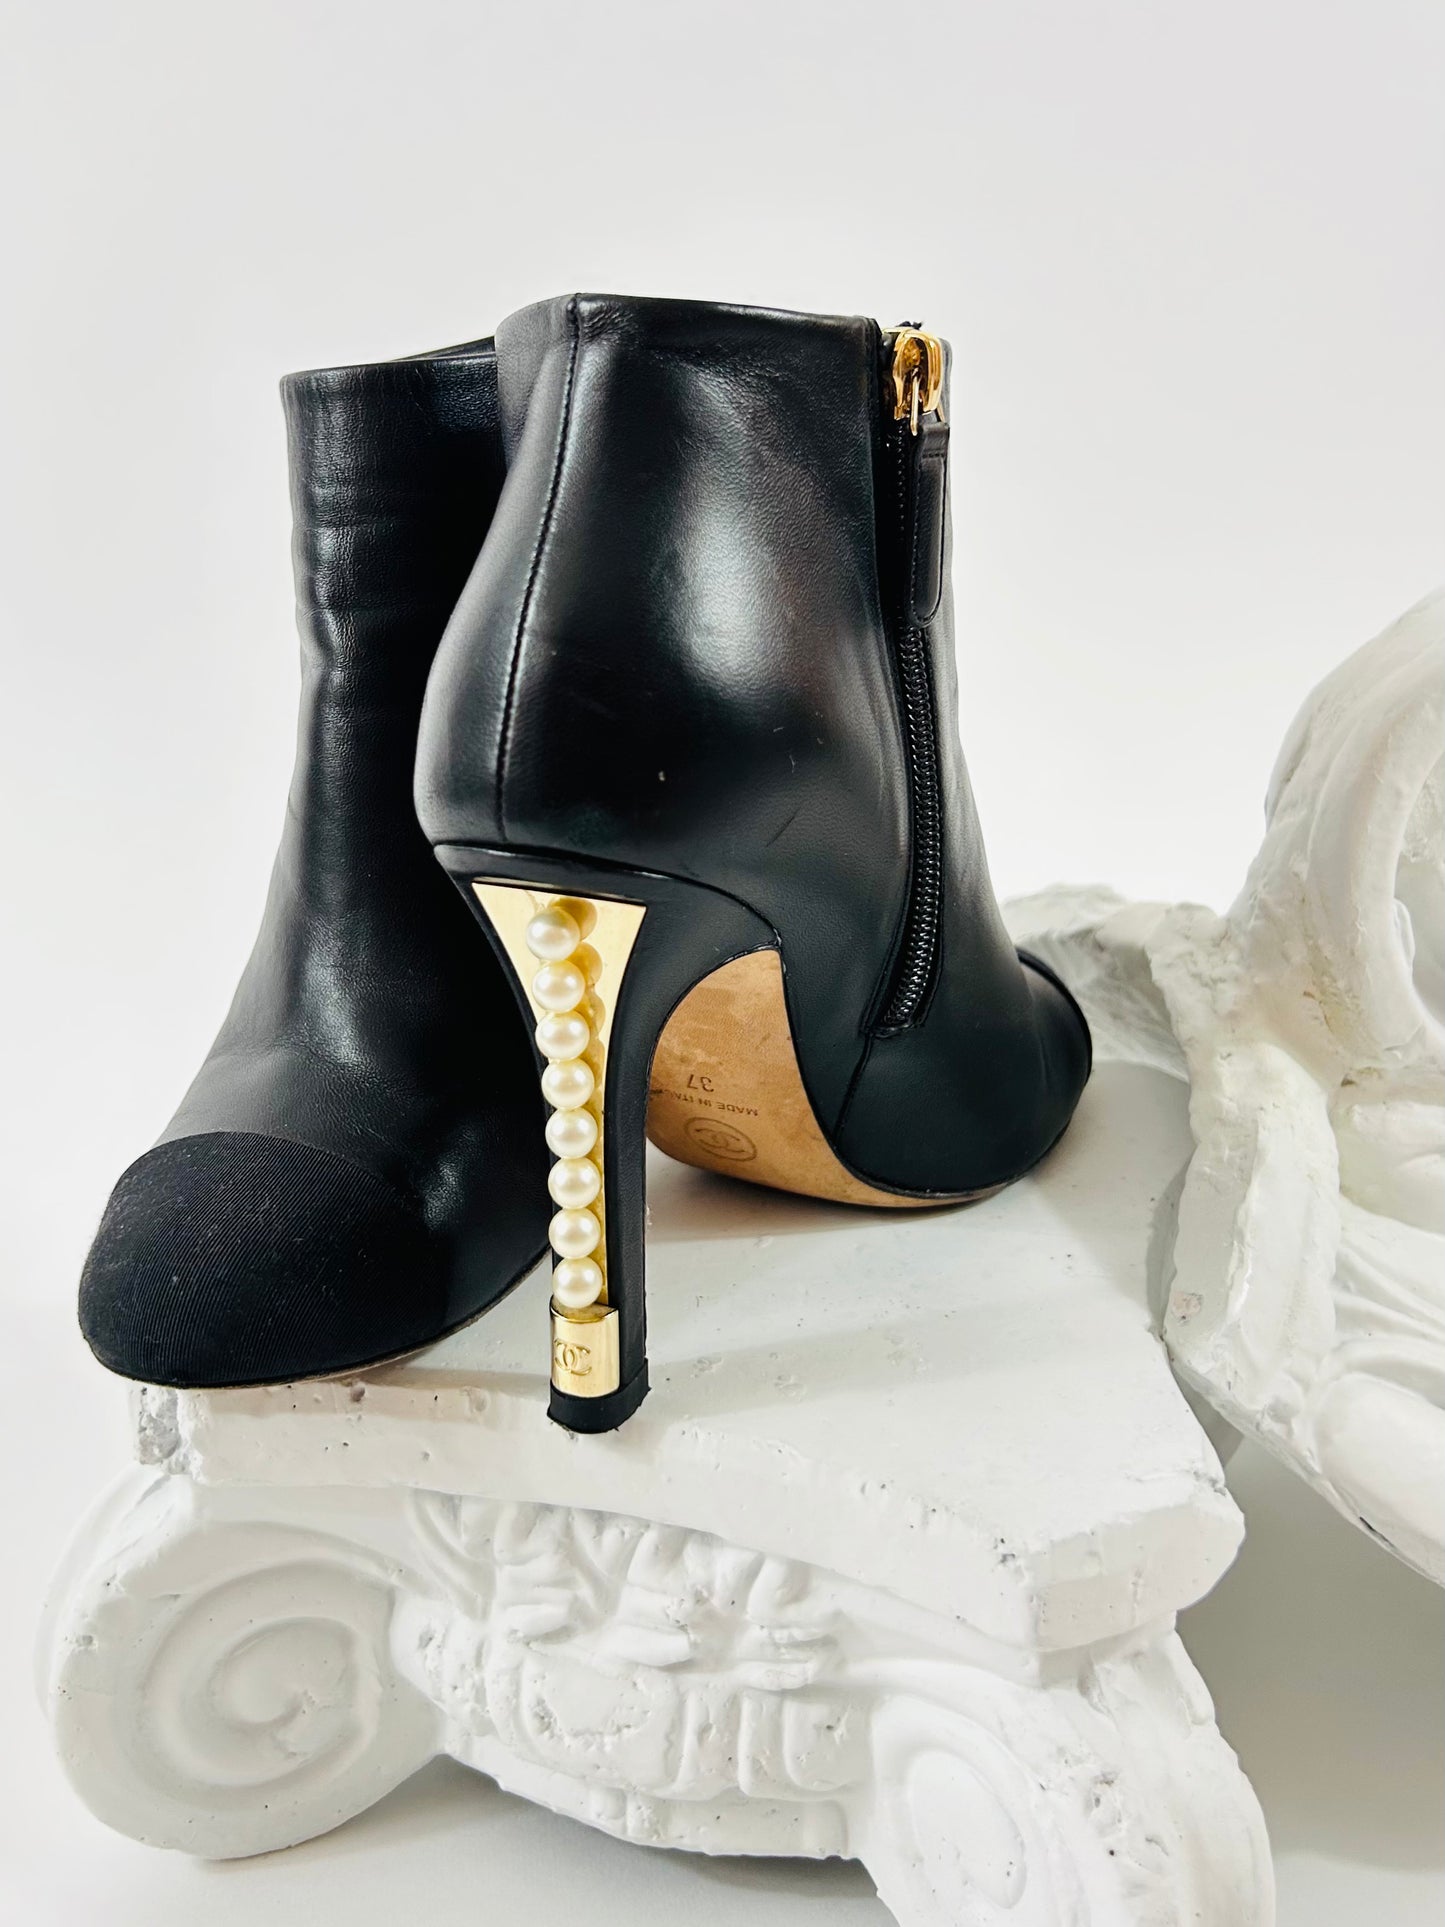 Chanel Black Heel with Pearls